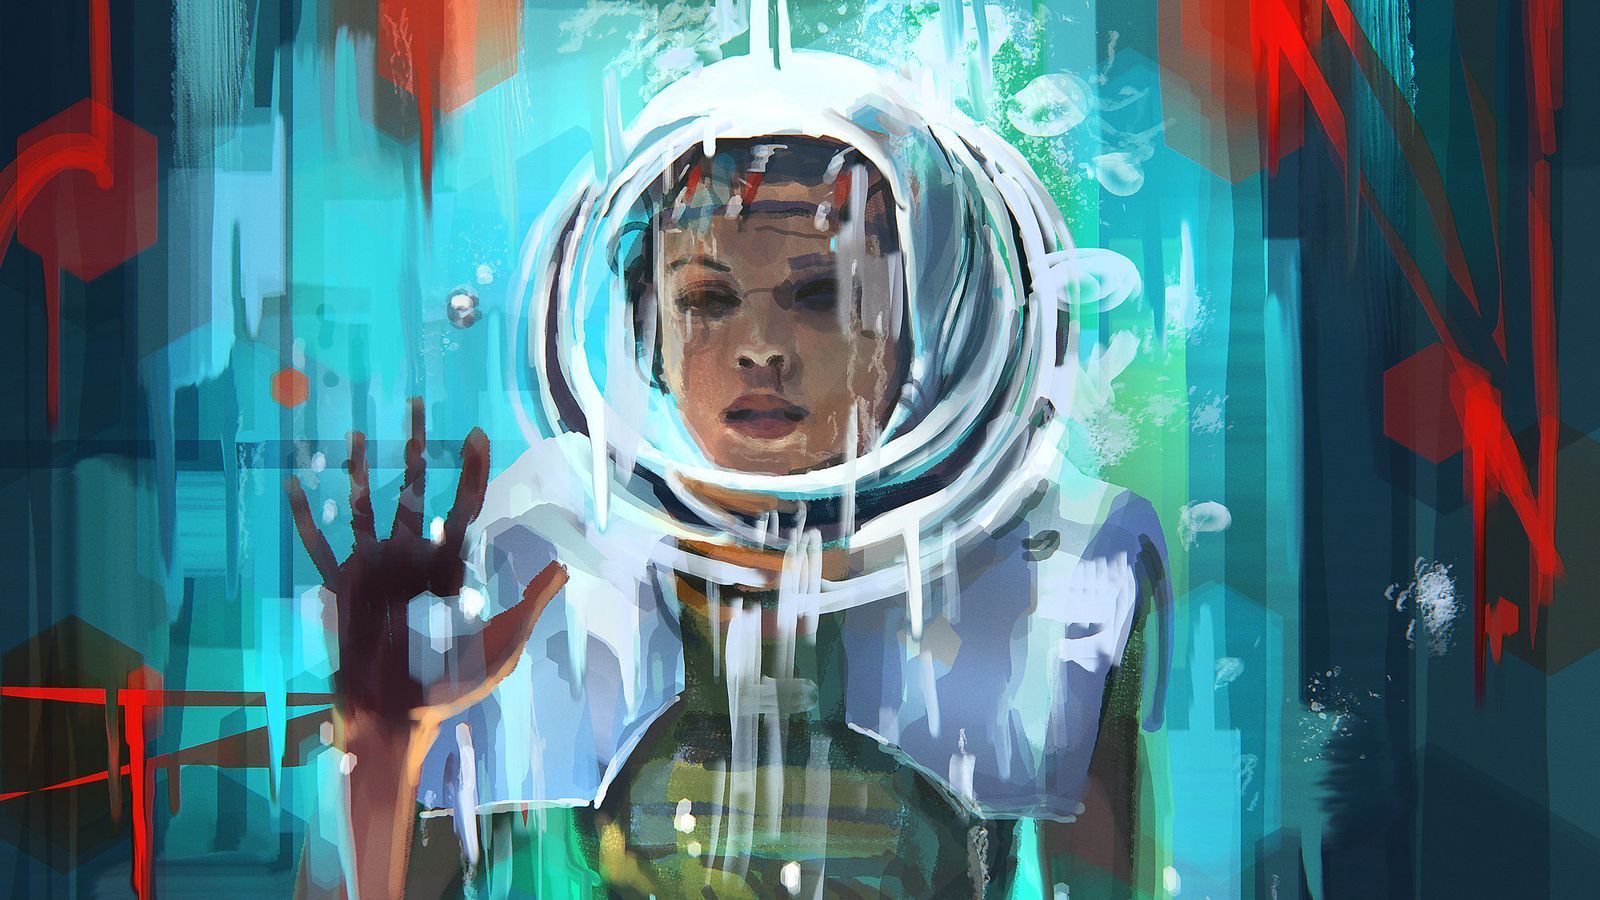 A painting of an astronaut in space - Stranger Things